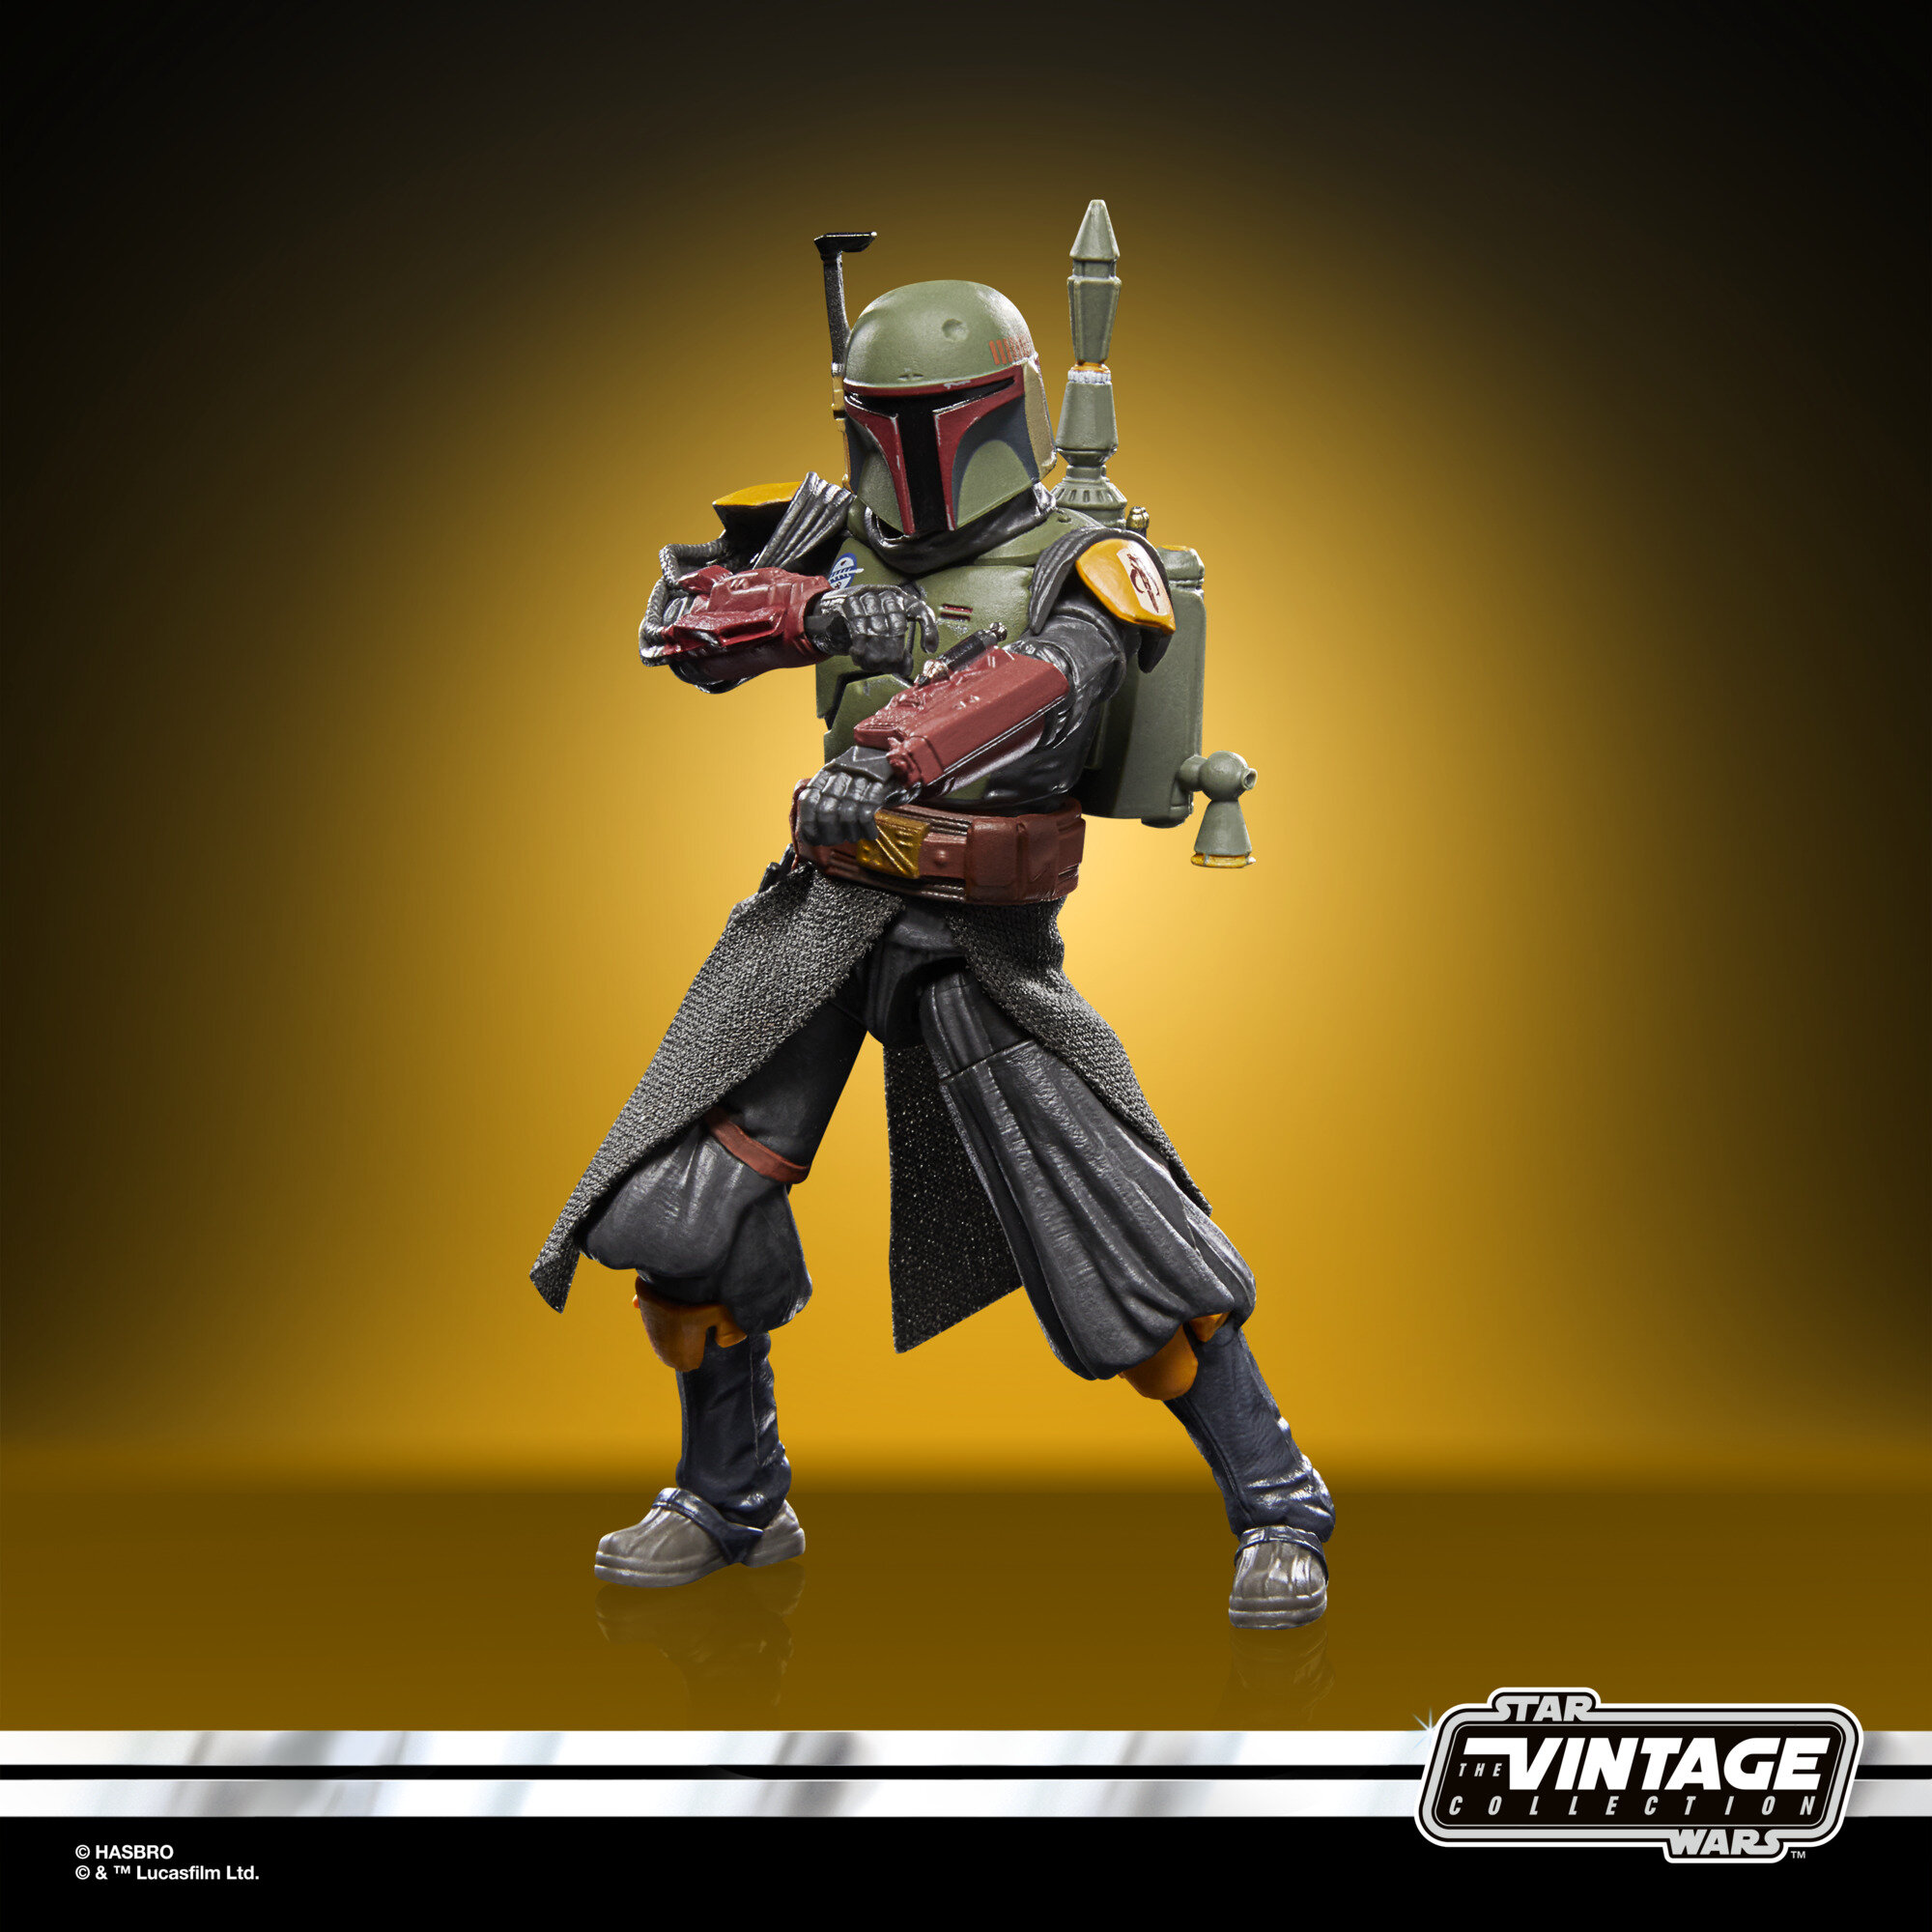 STAR-WARS-THE-VINTAGE-COLLECTION-BOBA-FETT-MORAK-Figure-1.jpg.a0b89d9ca7d753ad96312b5dc52a6b10.jpg